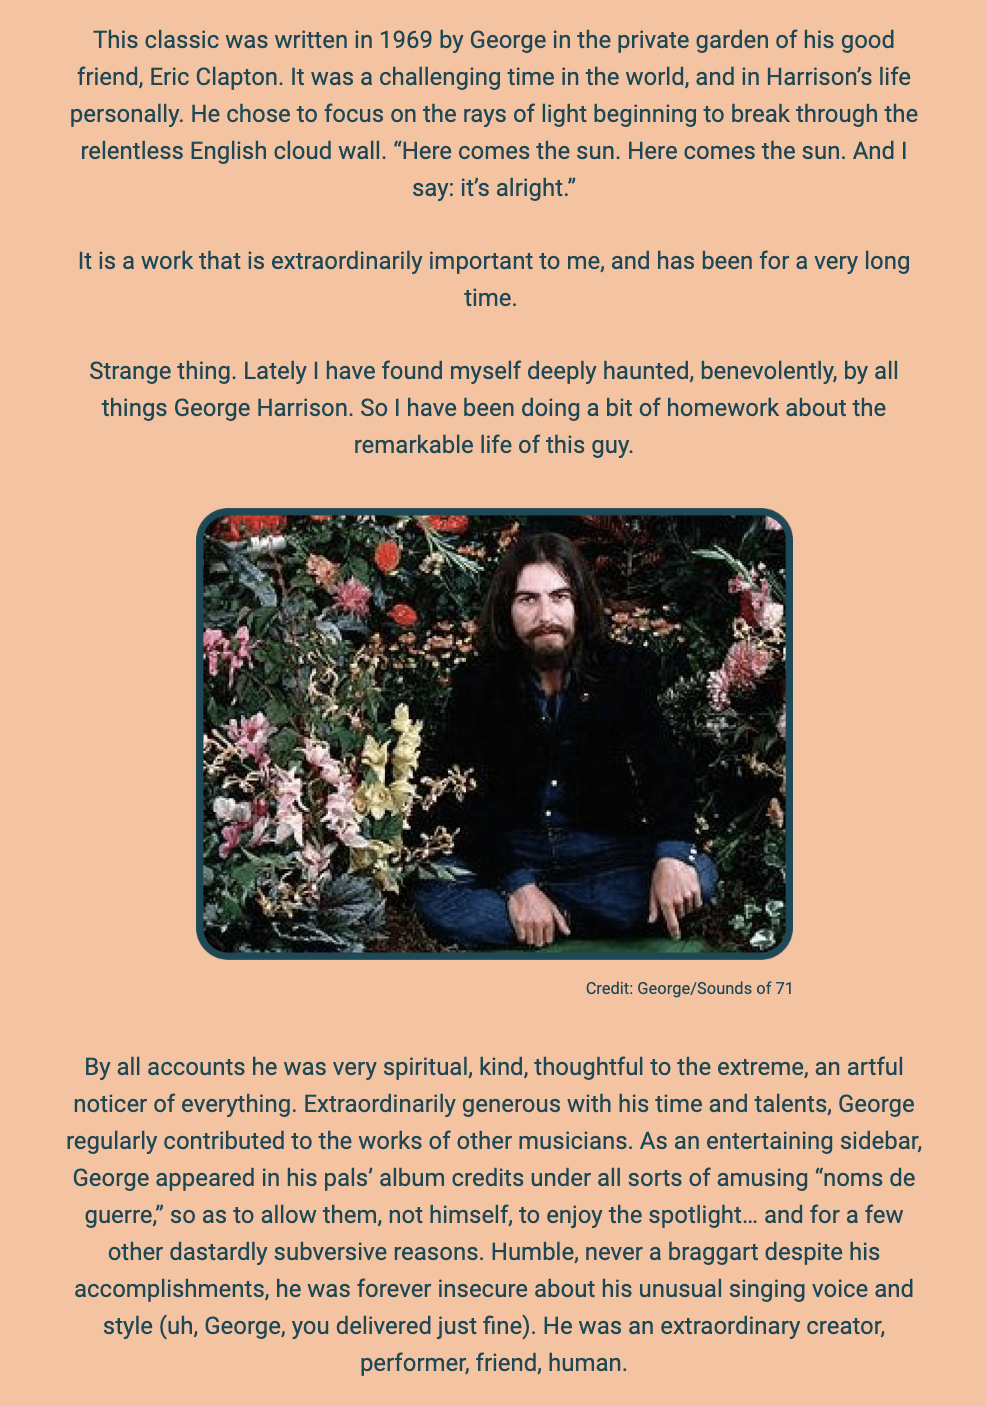 The image is a written tribute to George Harrison, focused on the song "Here Comes The Sun" and Harrison's character. The text is superimposed on a simple background with an image of George Harrison seated in a garden filled with flowers.

The author recounts the creation of "Here Comes The Sun" in 1969 in the private garden of Harrison's friend Eric Clapton, highlighting it as a response to a challenging time both globally and in Harrison's life. The song is described as focusing on the positive aspect of light breaking through the relentless English cloud wall.

The text indicates the song's deep personal importance to the author and mentions a recent deepened interest in George Harrison's life. The author feels benevolently haunted by Harrison's spirit and has been researching his life.

A photo of George Harrison in a garden accompanies the text, with a credit to "George/Sounds of 71." The latter part of the text reflects on Harrison's spirituality, kindness, thoughtfulness, generosity with time and talents, contributions to other musicians' works, and humility despite insecurities about his singing voice and style. The author emphasizes Harrison's nature as a creator, performer, friend, and human.

The text within the image reads:
"This classic was written in 1969 by George in the private garden of his good friend, Eric Clapton. It was a challenging time in the world, and in Harrison’s life personally. He chose to focus on the rays of light beginning to break through the relentless English cloud wall. 'Here comes the sun. Here comes the sun. And I say: it’s alright.'

It is a work that is extraordinarily important to me, and has been for a very long time.

Strange thing. Lately I have found myself deeply haunted, benevolently, by all things George Harrison. So I have been doing a bit of homework about the remarkable life of this guy.

Credit: George/Sounds of 71

By all accounts he was very spiritual, kind, thoughtful to the extreme, an artful noticer of everything. Extraordinarily generous with his time and talents, George regularly contributed to the works of other musicians. As an entertaining sidebar, George appeared in his pals’ album credits under all sorts of amusing 'noms de guerre,' so as to allow them, not himself, to enjoy the spotlight... and for a few other dastardly subversive reasons. Humble, never a braggart despite his accomplishments, he was forever insecure about his unusual singing voice and style (uh, George, you delivered just fine). He was an extraordinary creator, performer, friend, human."